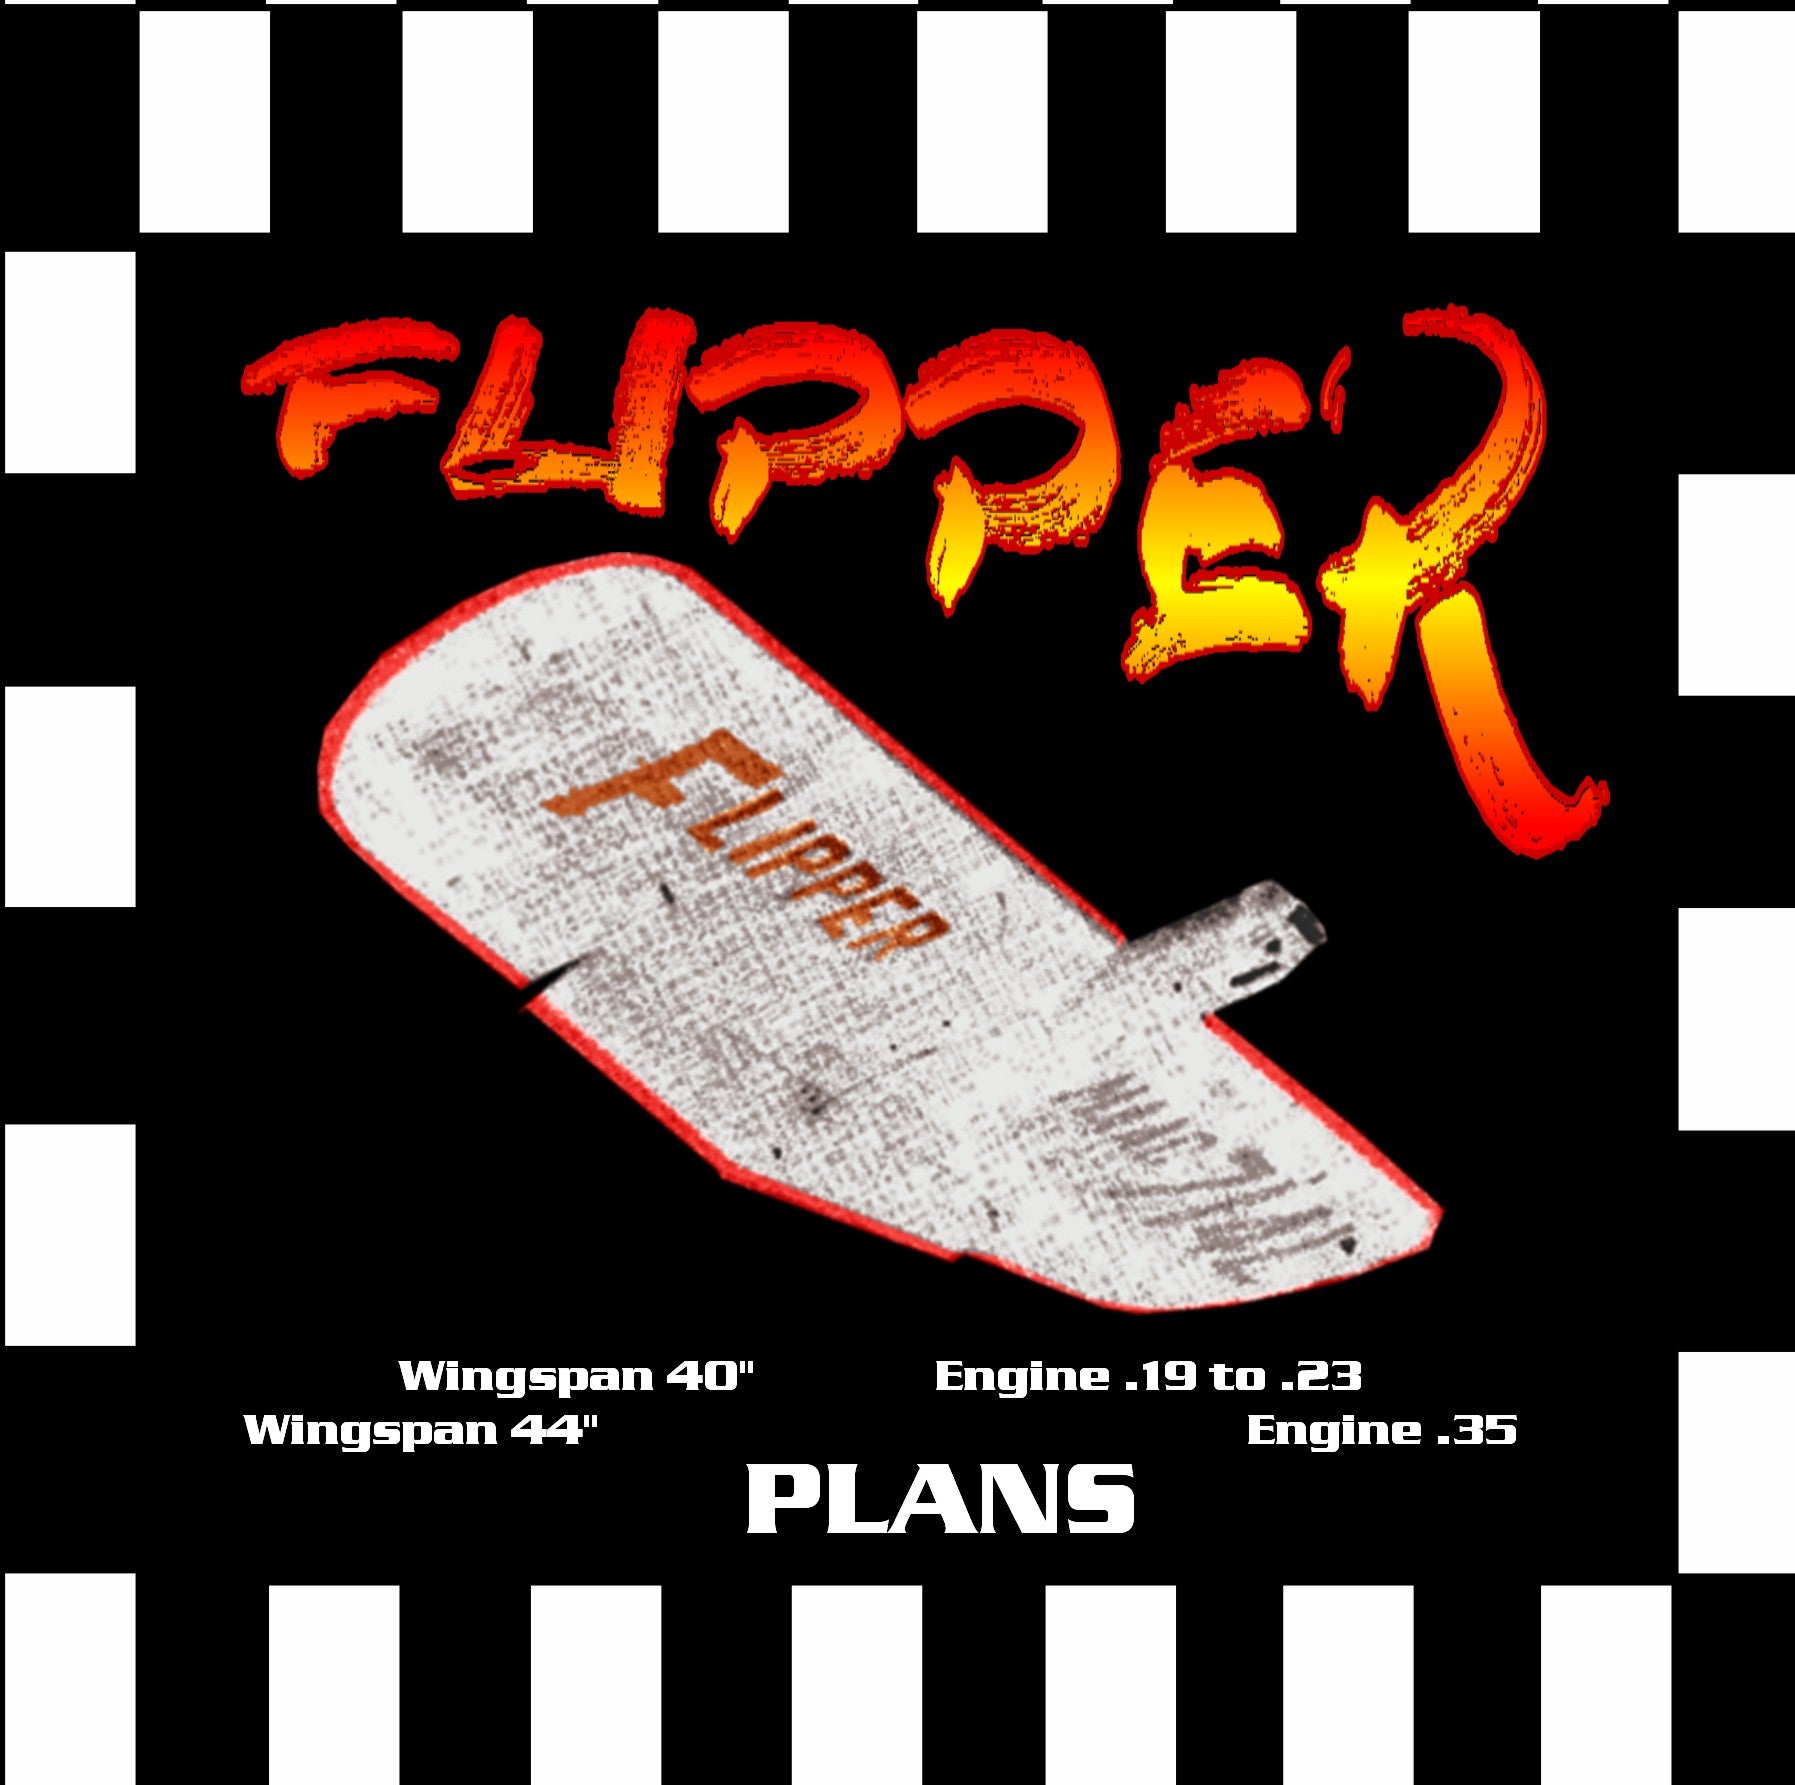 full size printed plan & building notes  two sizes fai combat *flipper* wingspan 40" -engine .19 to .23  wingspan 44" -engine .35